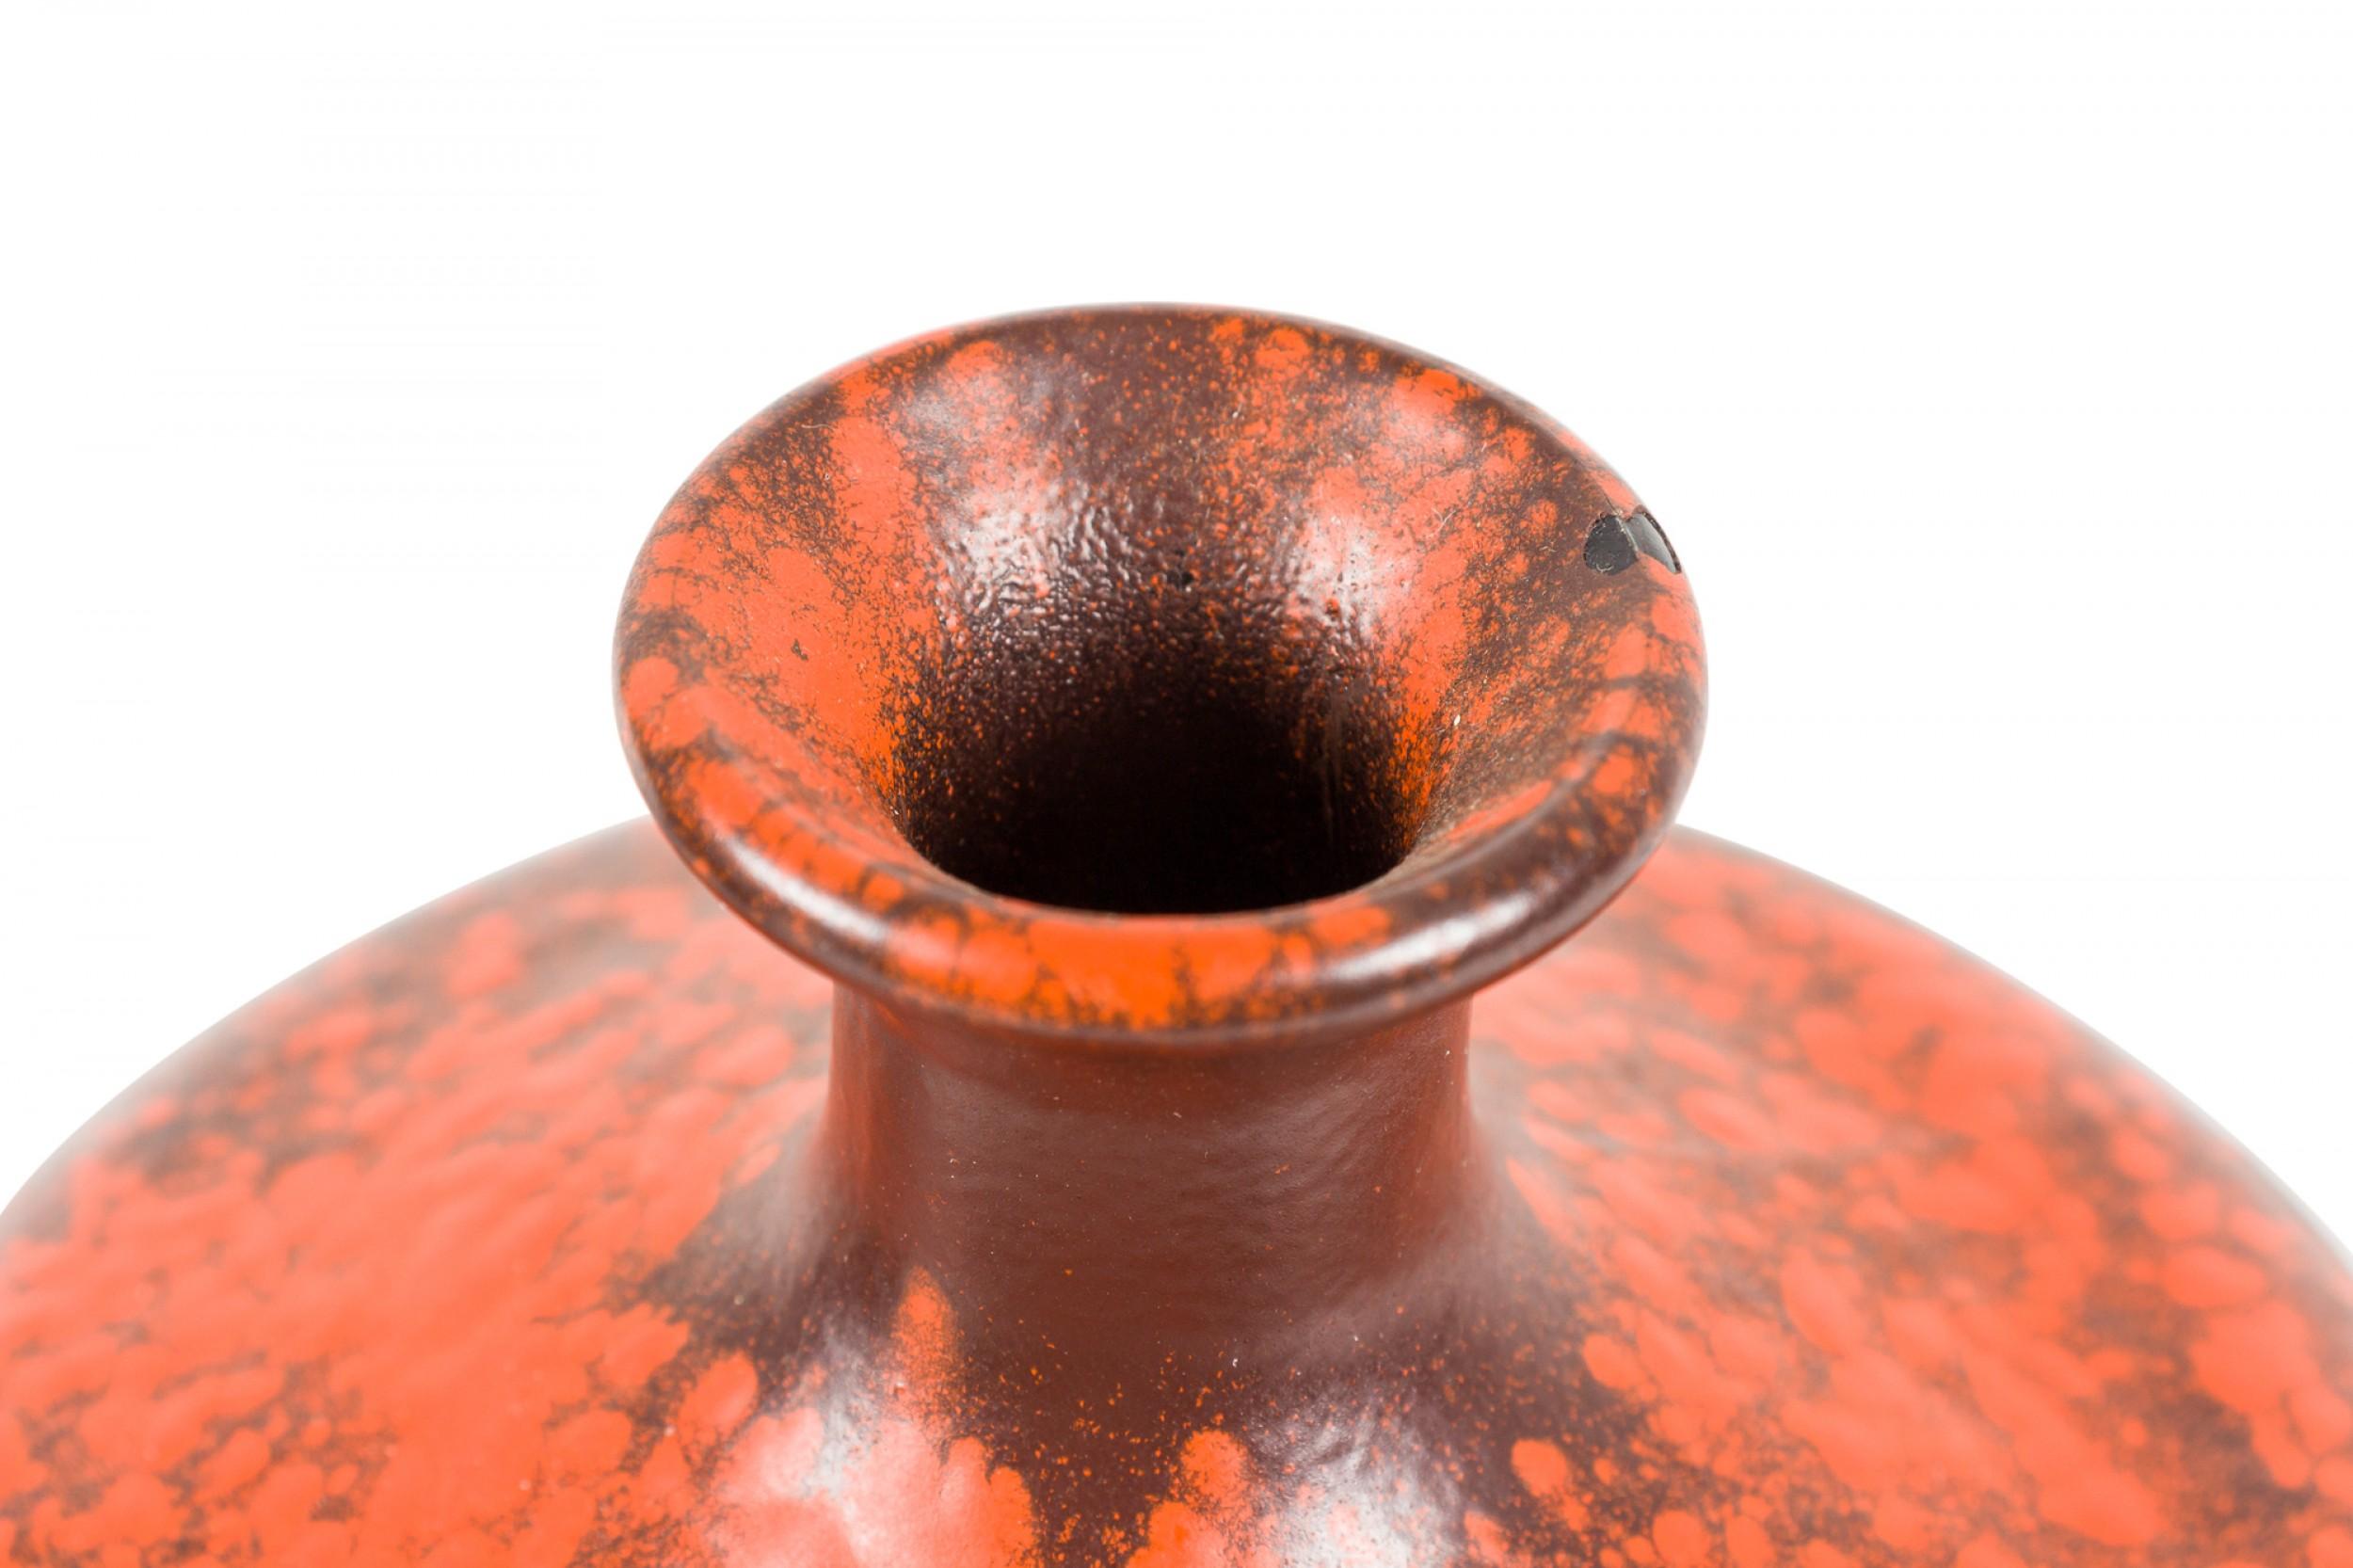 Pair of German Mid-Century ceramic vase with a bulbous body tapering to a thin neck with a flared opening, with a chocolate brown glaze specked on top with bright orange. (PRICED AS PAIR)(sticker on bottom, Nordsee 178).